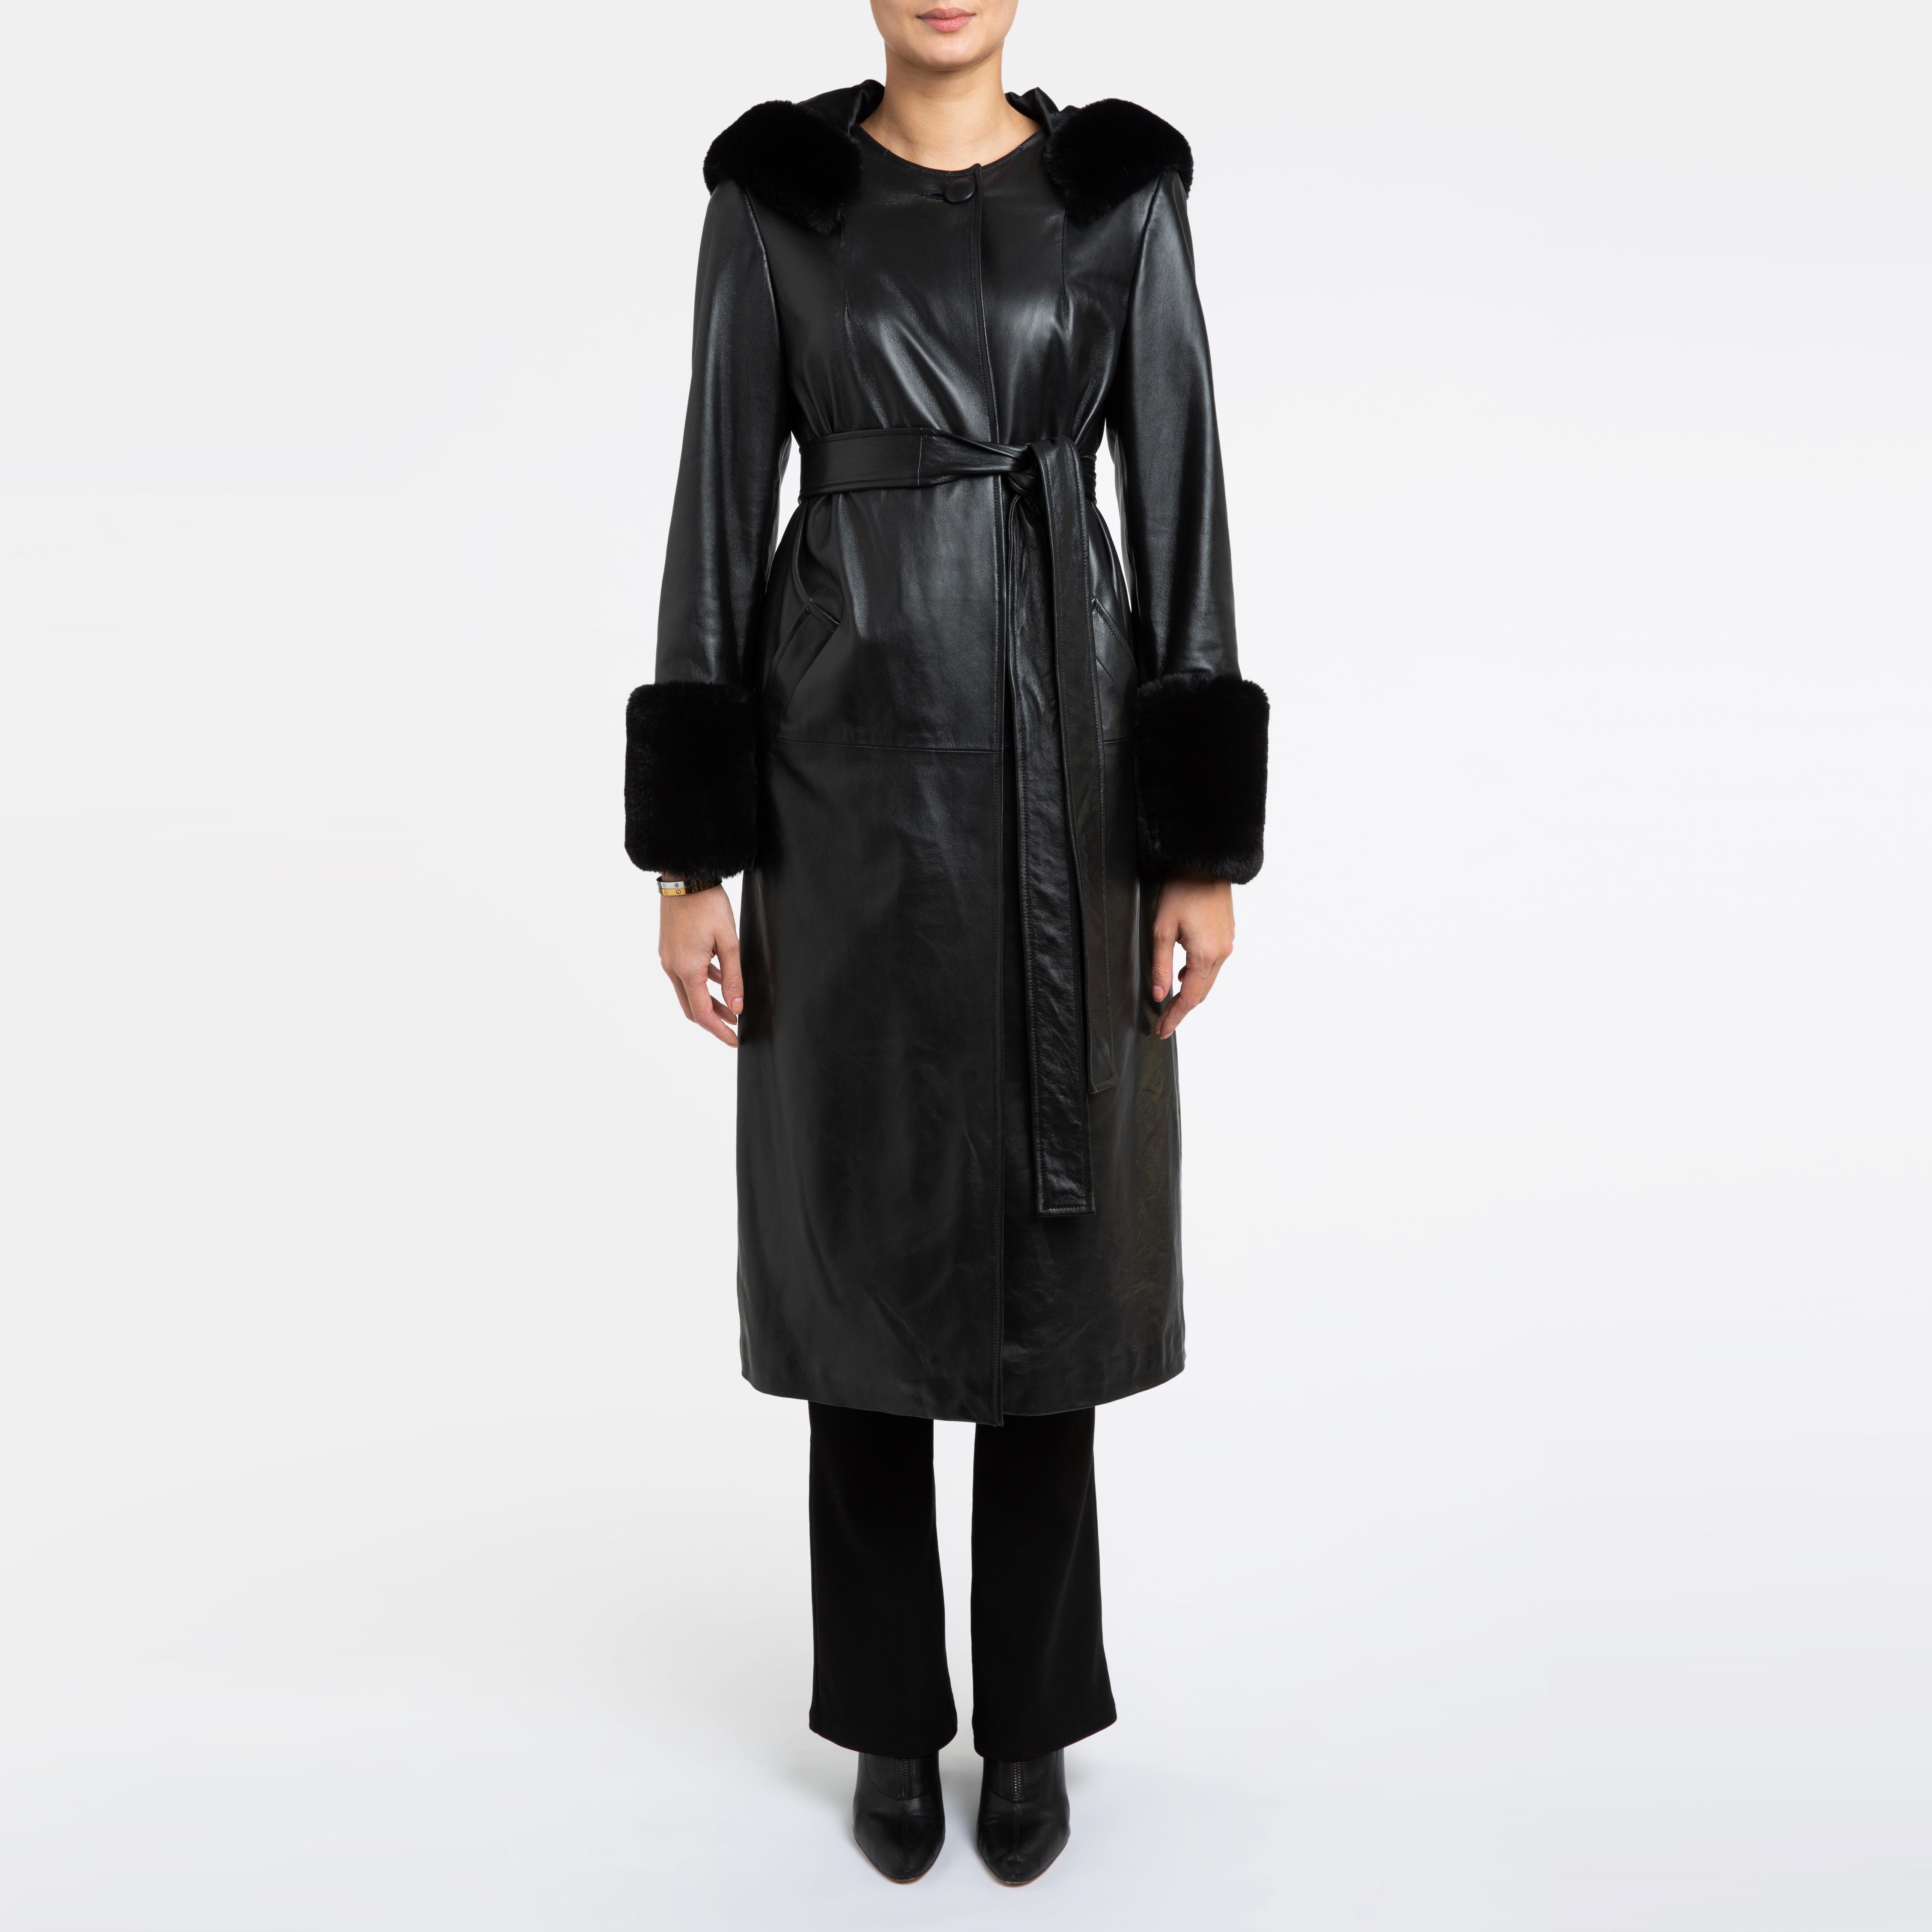 Verheyen London Hooded Leather Trench Coat in Black with Faux Fur - Size uk 14

Handmade in London, made with 100% Italian Lambs Leather and the highest quality of faux fur to match, this luxury item is an investment piece to wear for a lifetime.